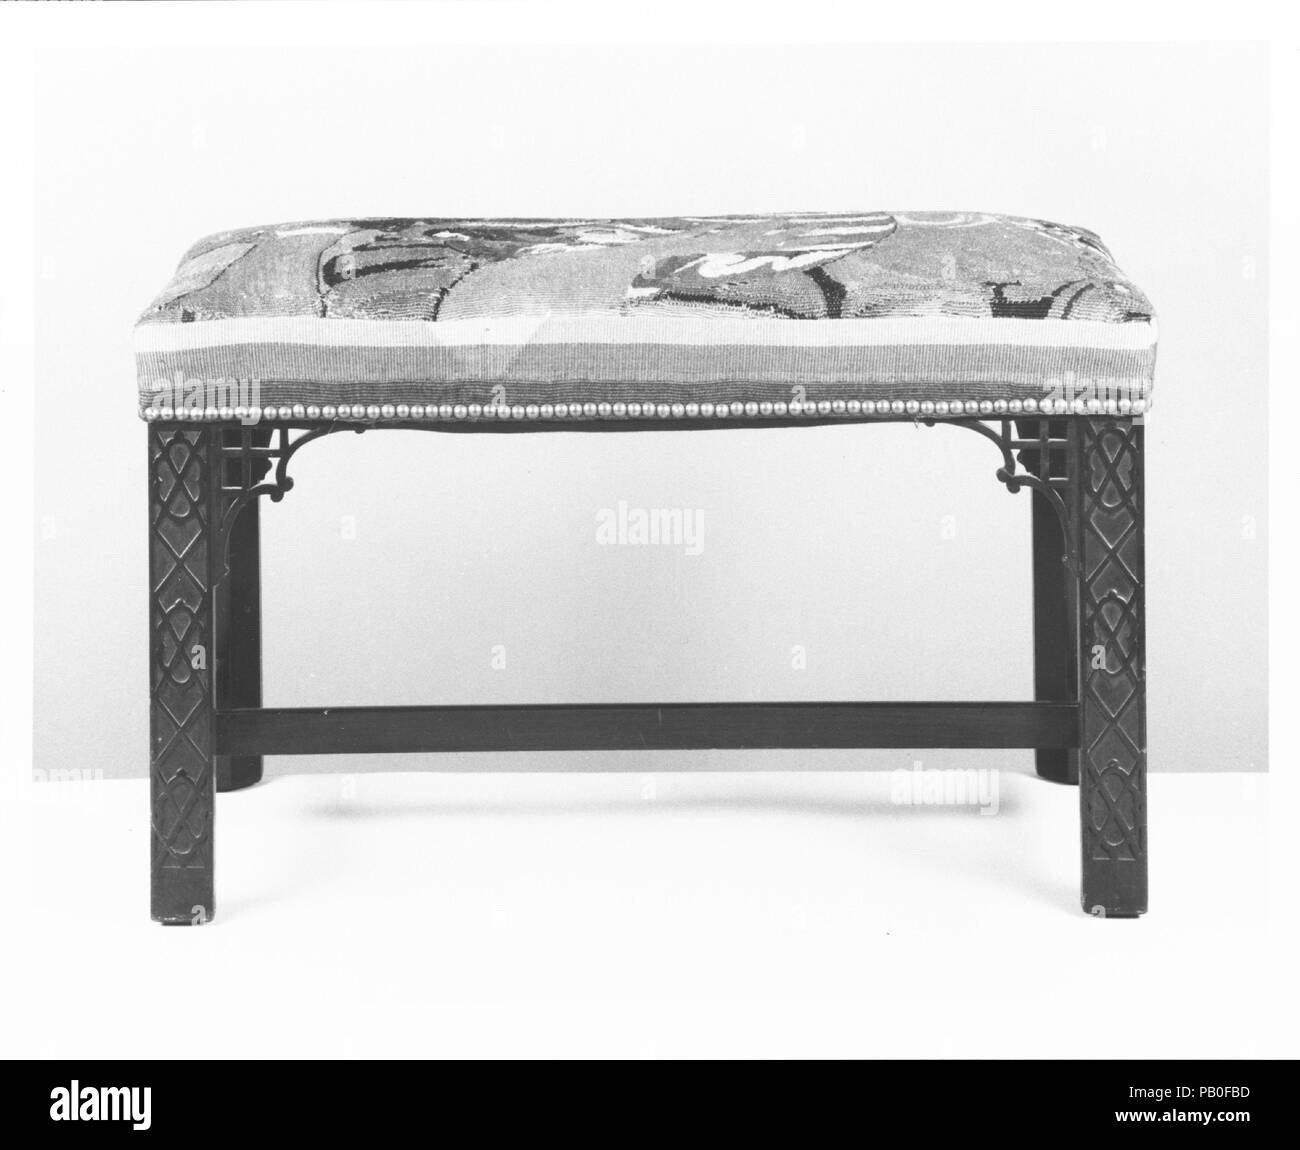 Bench. Culture: American. Designer: Designed by Louis Comfort Tiffany (American, New York 1848-1933 New York). Dimensions: 17 1/2 x 27 1/2 x 16 11/16 in. (44.5 x 69.9 x 42.4 cm). Maker: Tiffany Studios (1902-32). Date: 1916.  Thomas Chippendale's influential book of furniture designs, 'The Gentleman and Cabinetmaker's Director' (London, 1754), tapped into the growing interest in Chinese ornament in England and the colonies. More than one hundred years later, Chippendale's furniture forms again saw a resurgence in popularity, as exemplified by this Tiffany Studios bench. The right angles, fretw Stock Photo